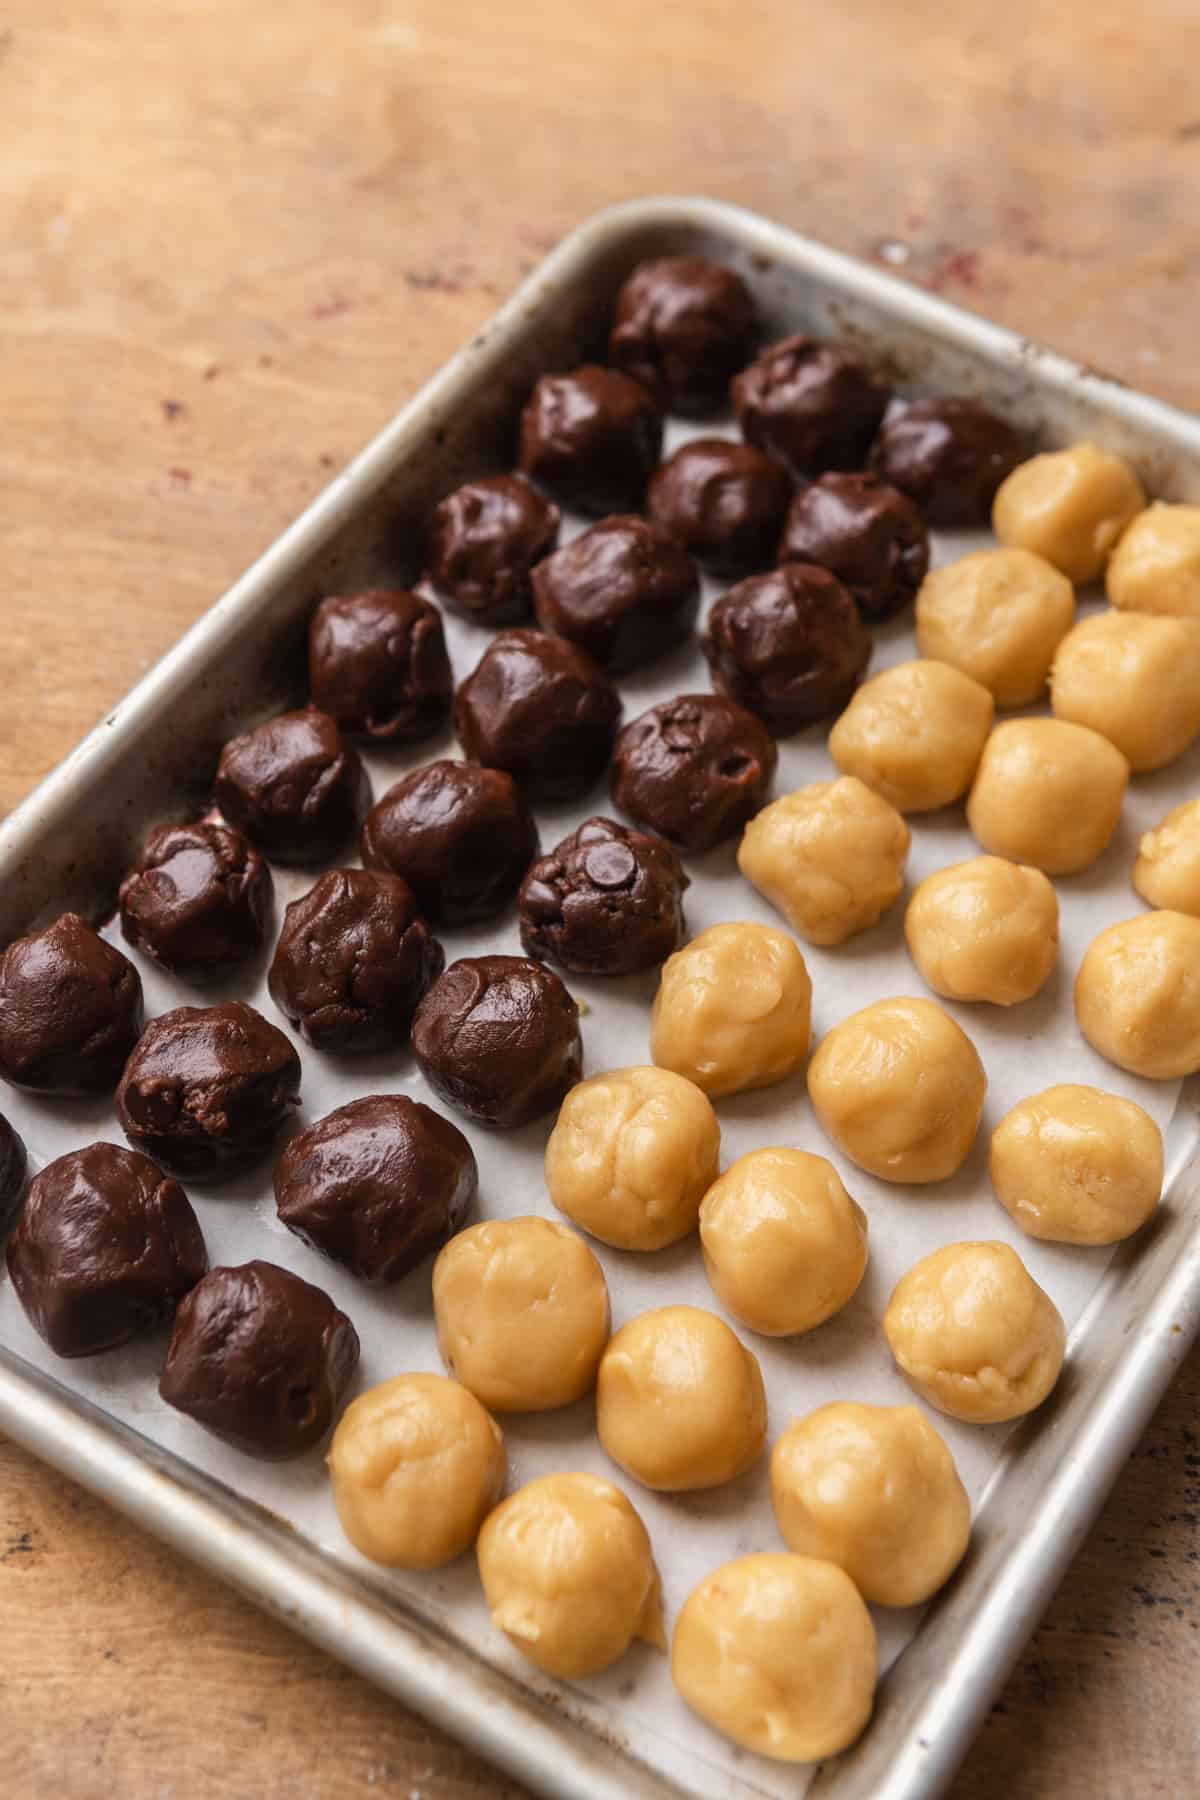 Plain and chocolate cookie dough balls on a cookie sheet.